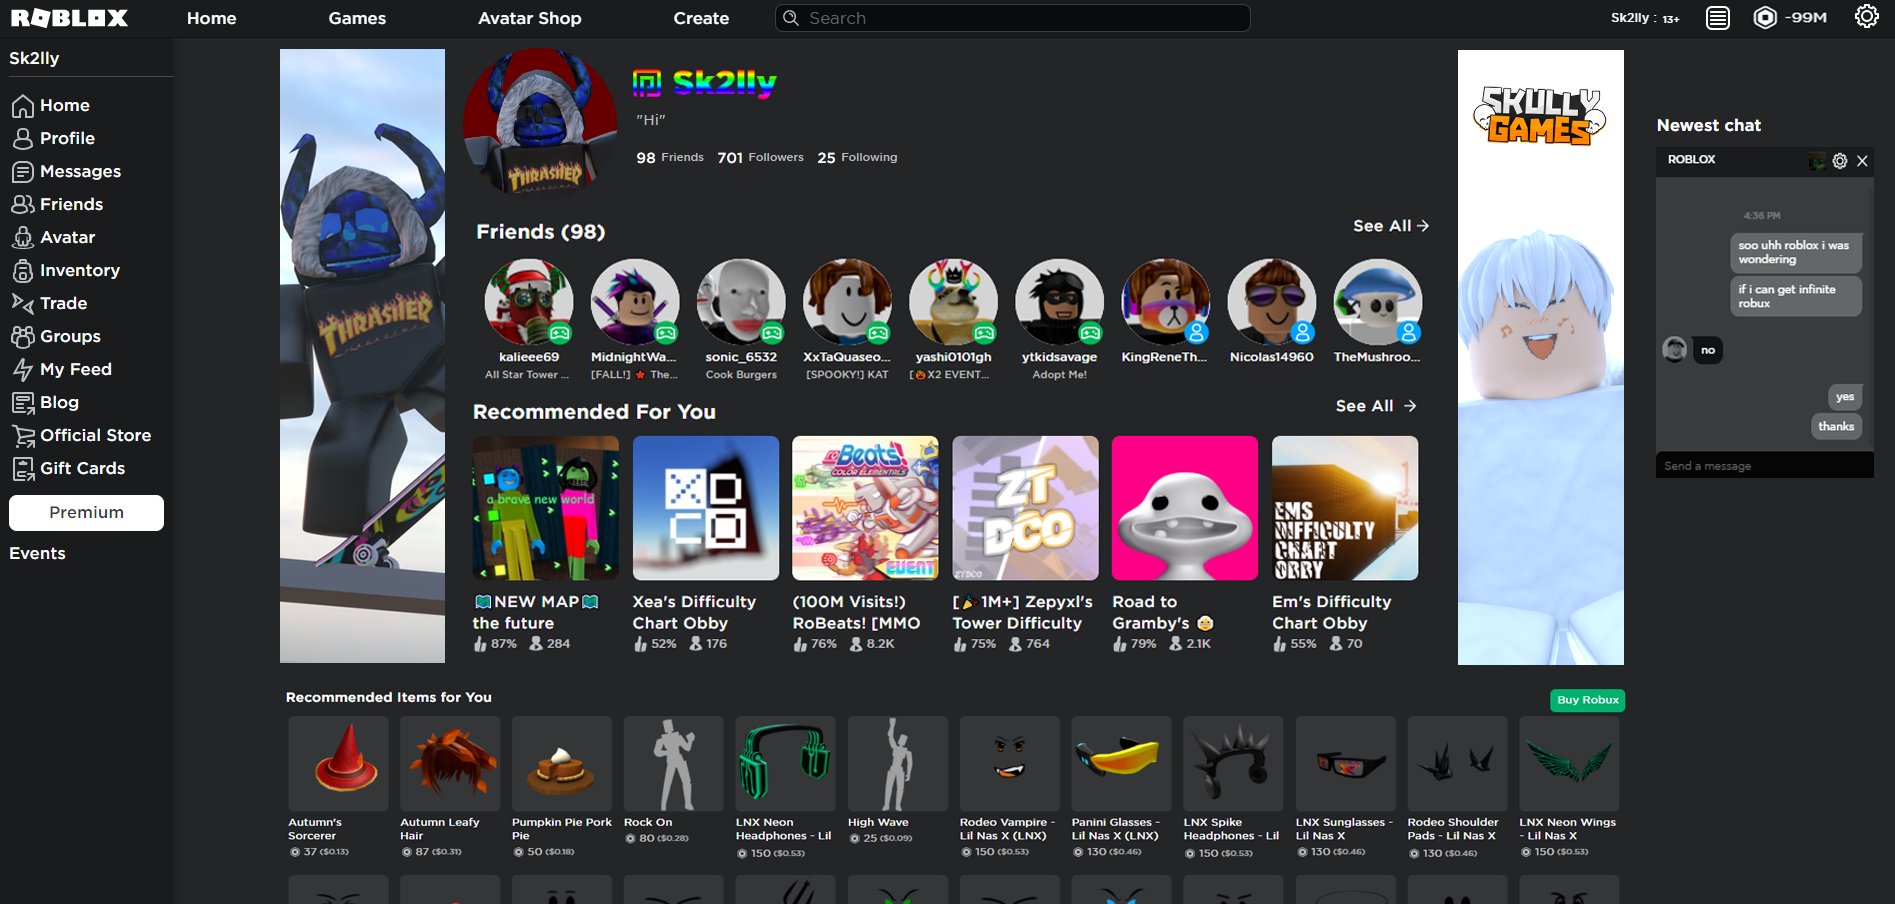 My homepage in Roblox😍🥰